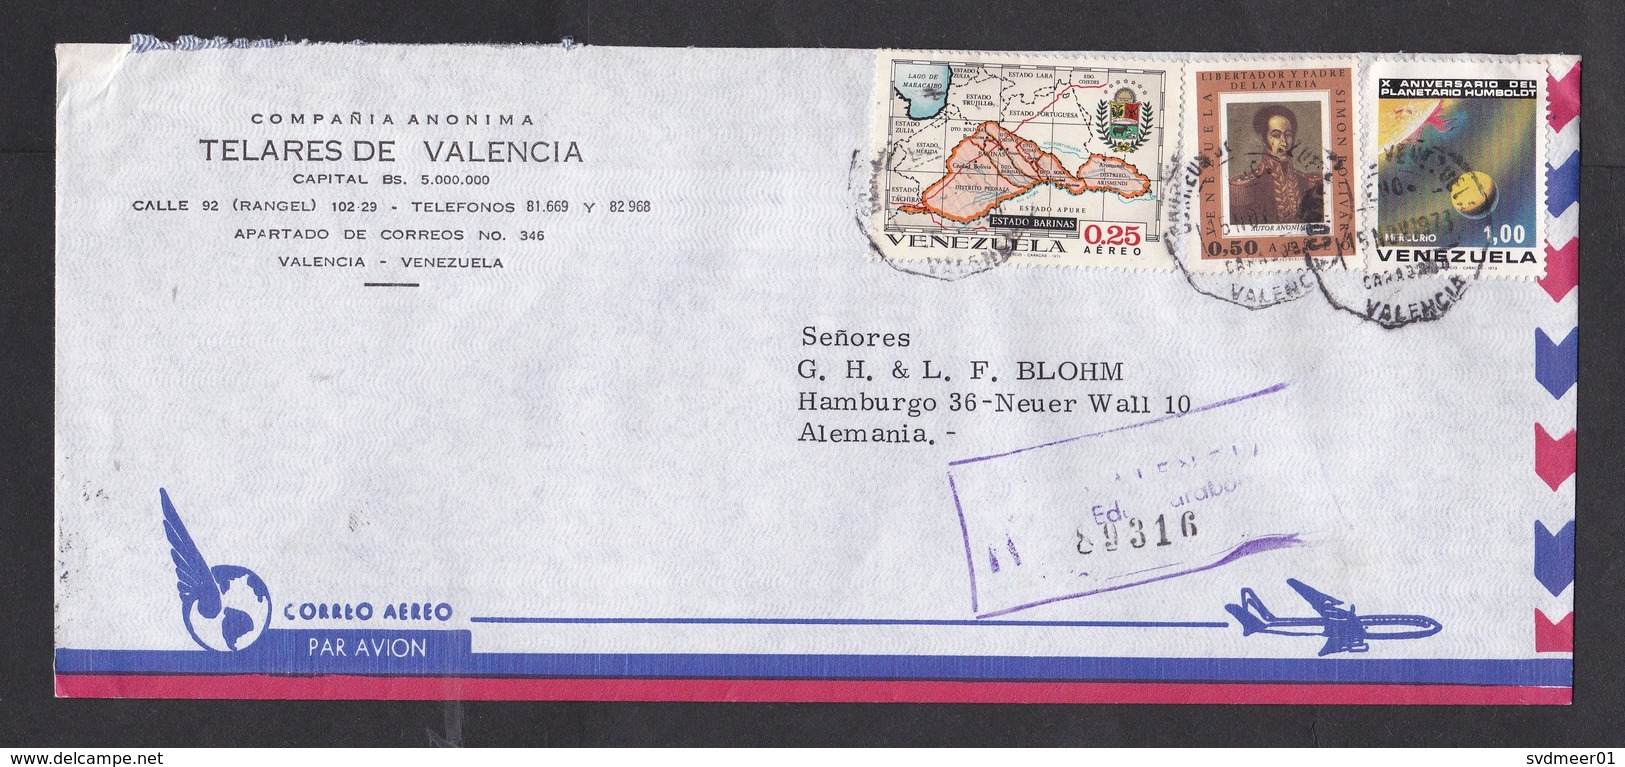 Venezuela: Airmail Cover To Germany, 1973, 3 Stamps, Planetarium Humboldt, Astronomy, Map, Rare Real Use (traces Of Use) - Venezuela